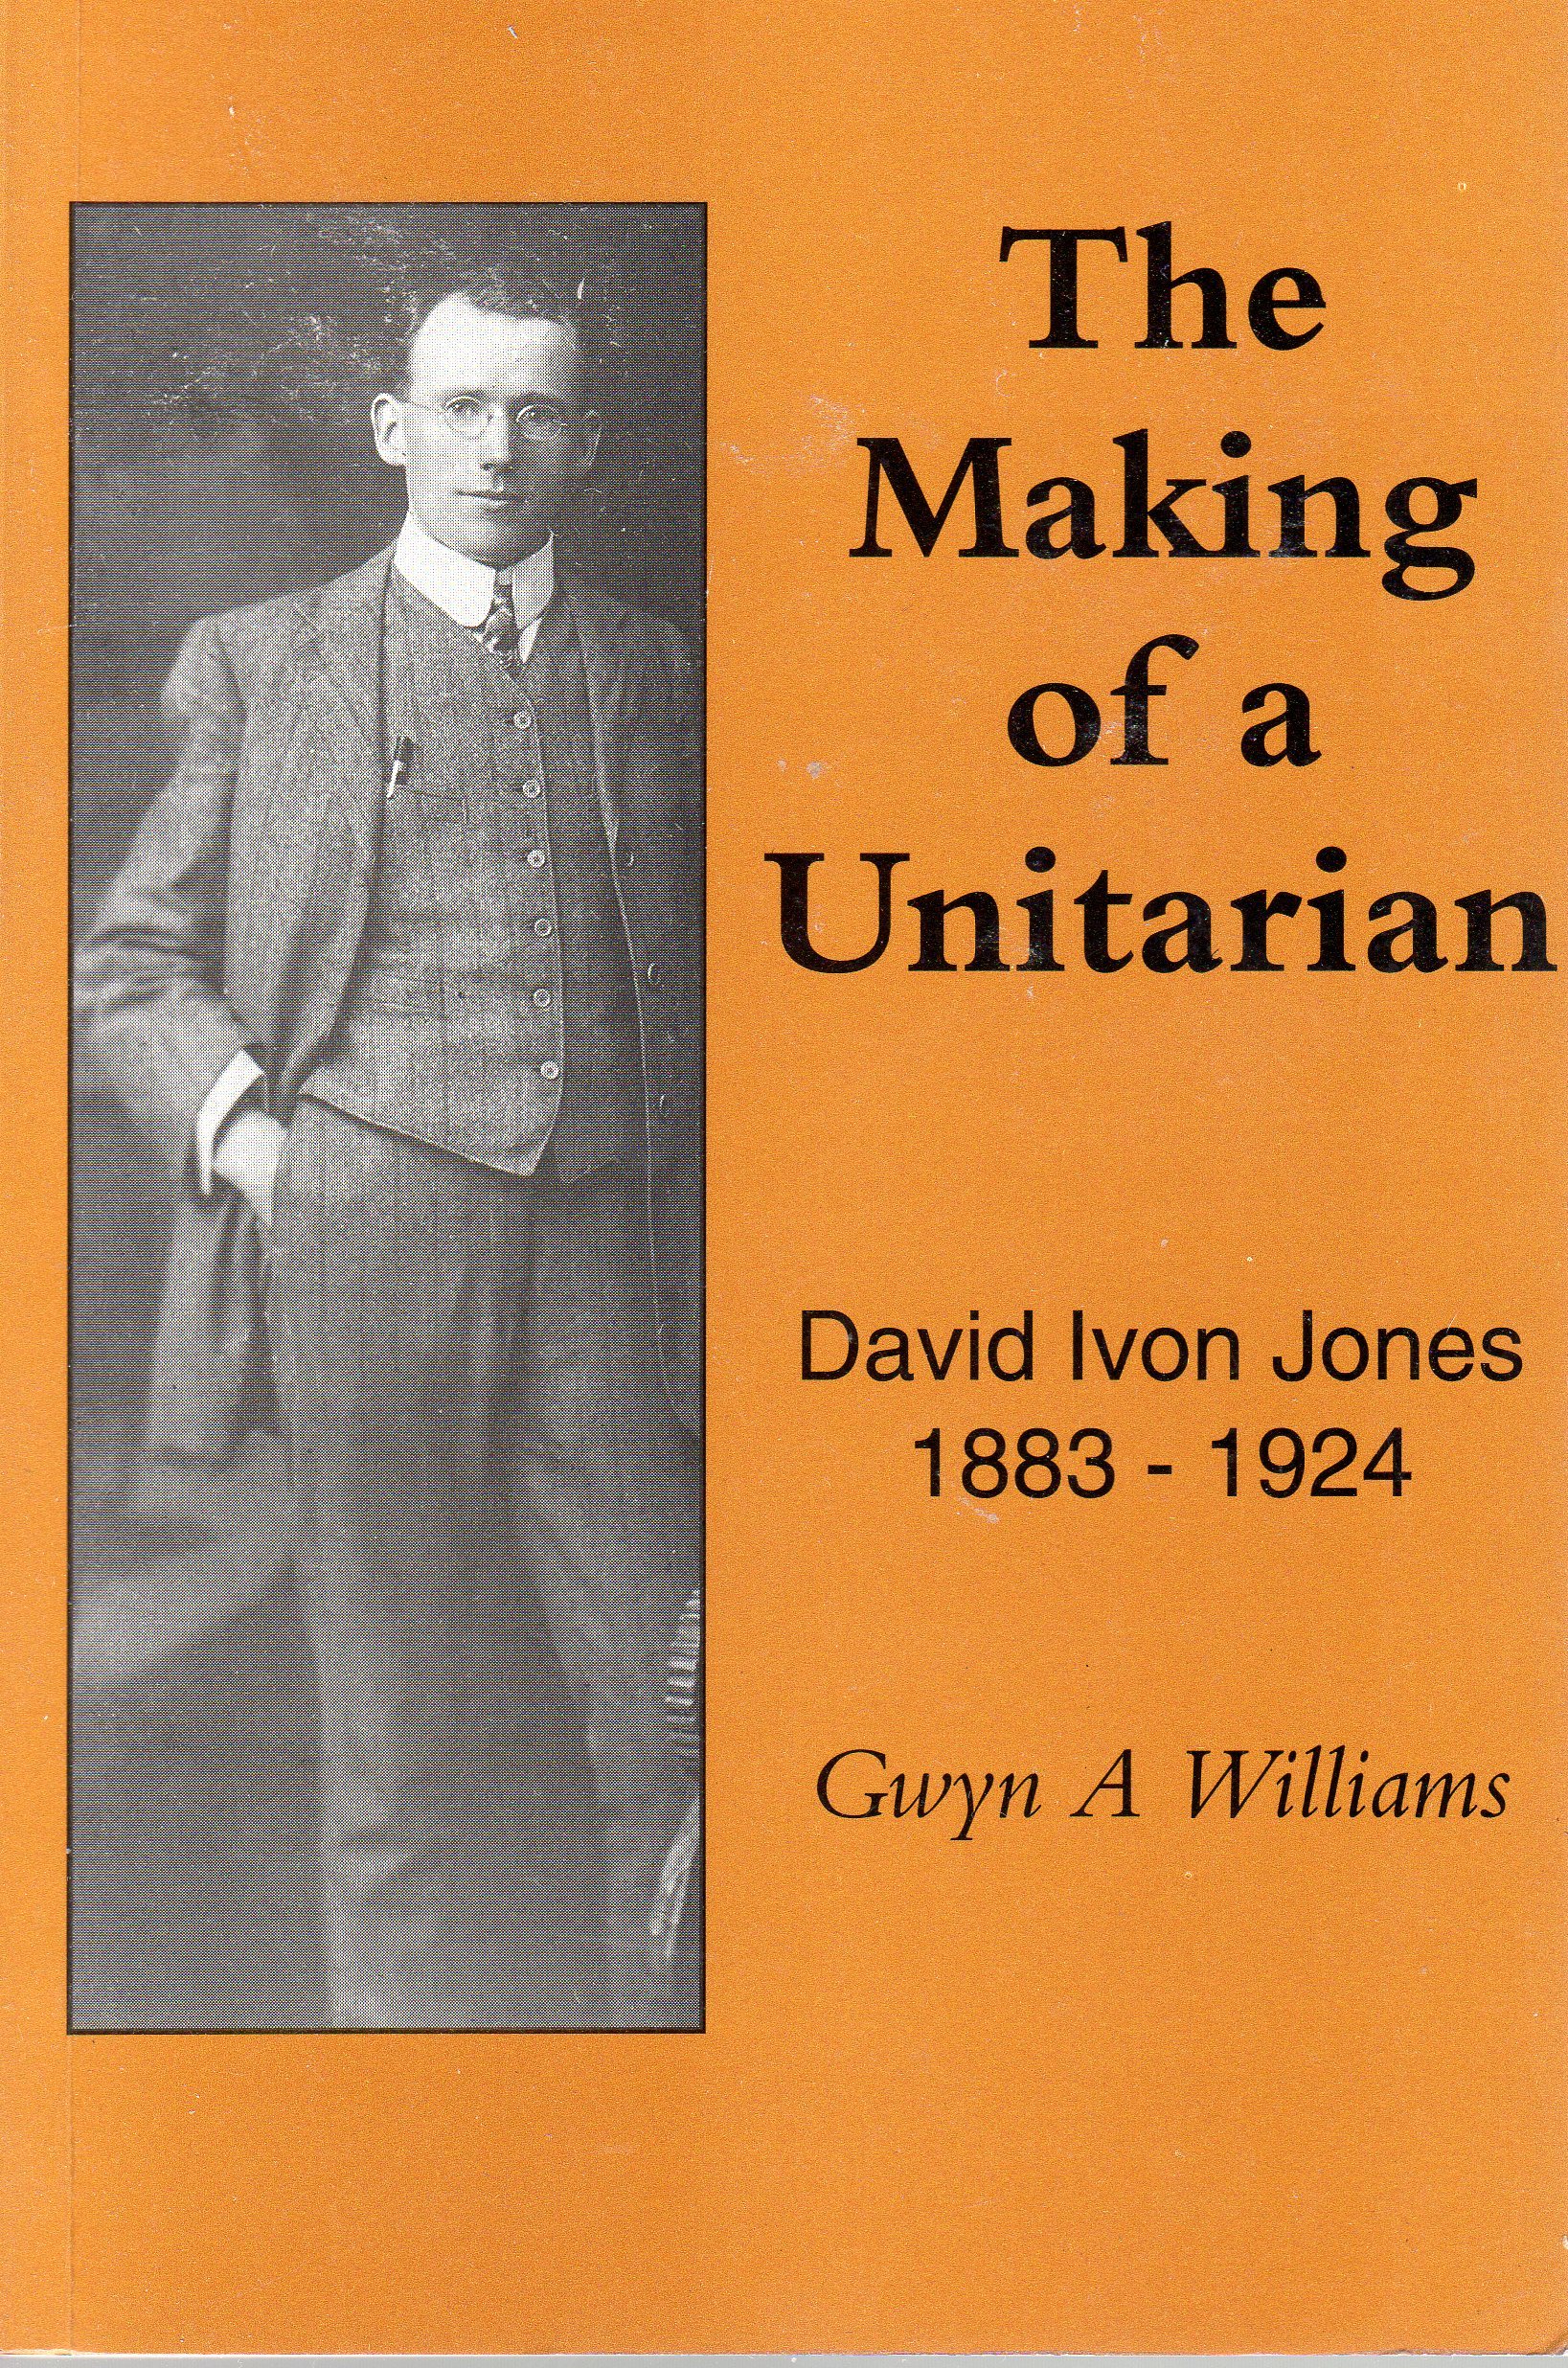 The Making of a Unitarian